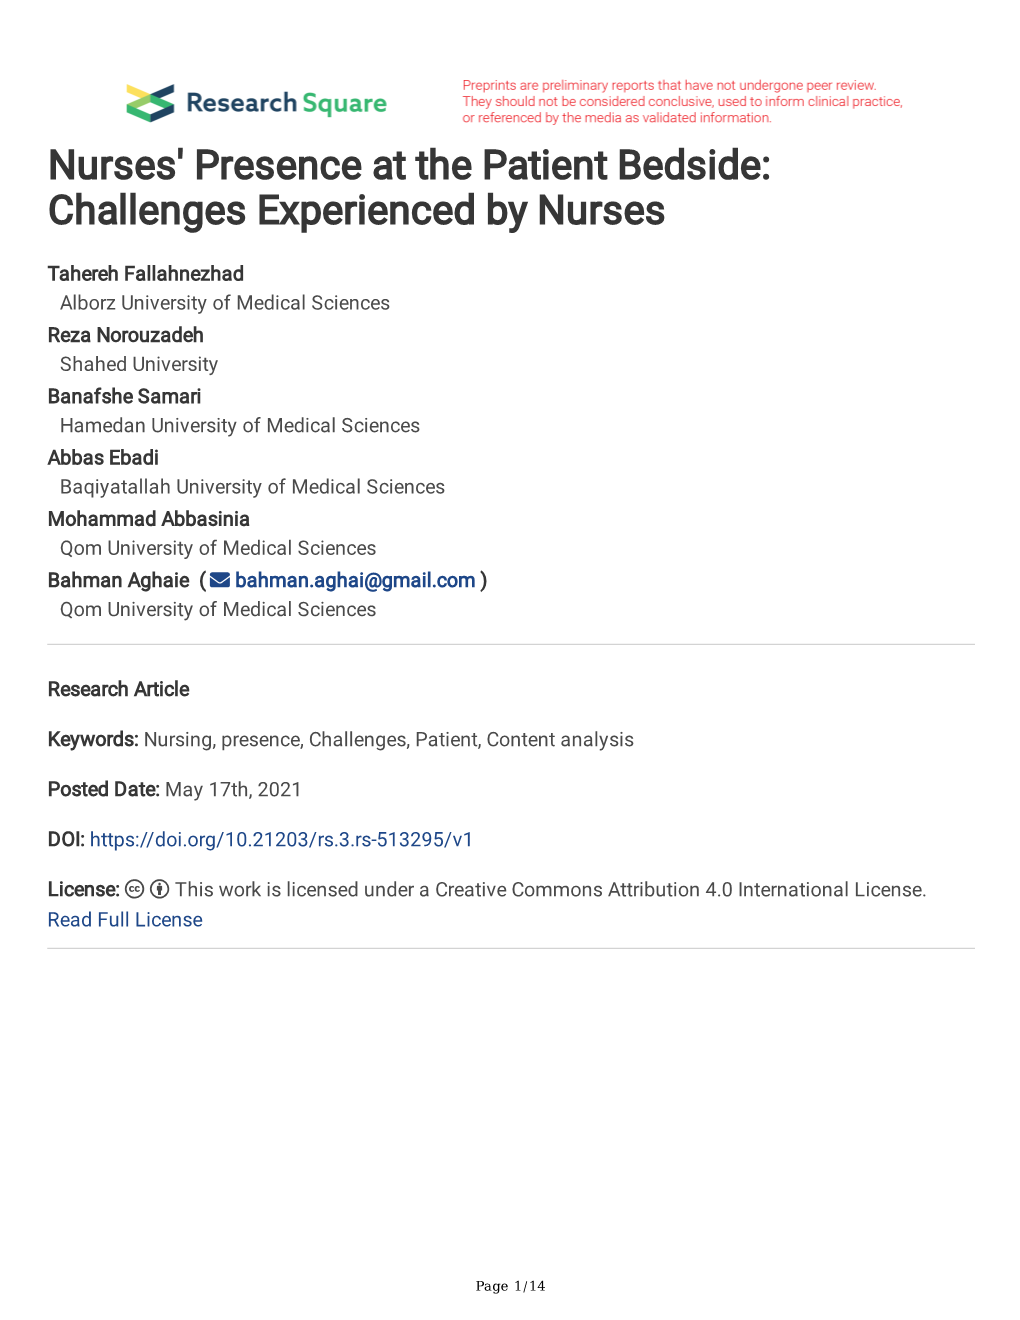 Nurses' Presence at the Patient Bedside: Challenges Experienced by Nurses